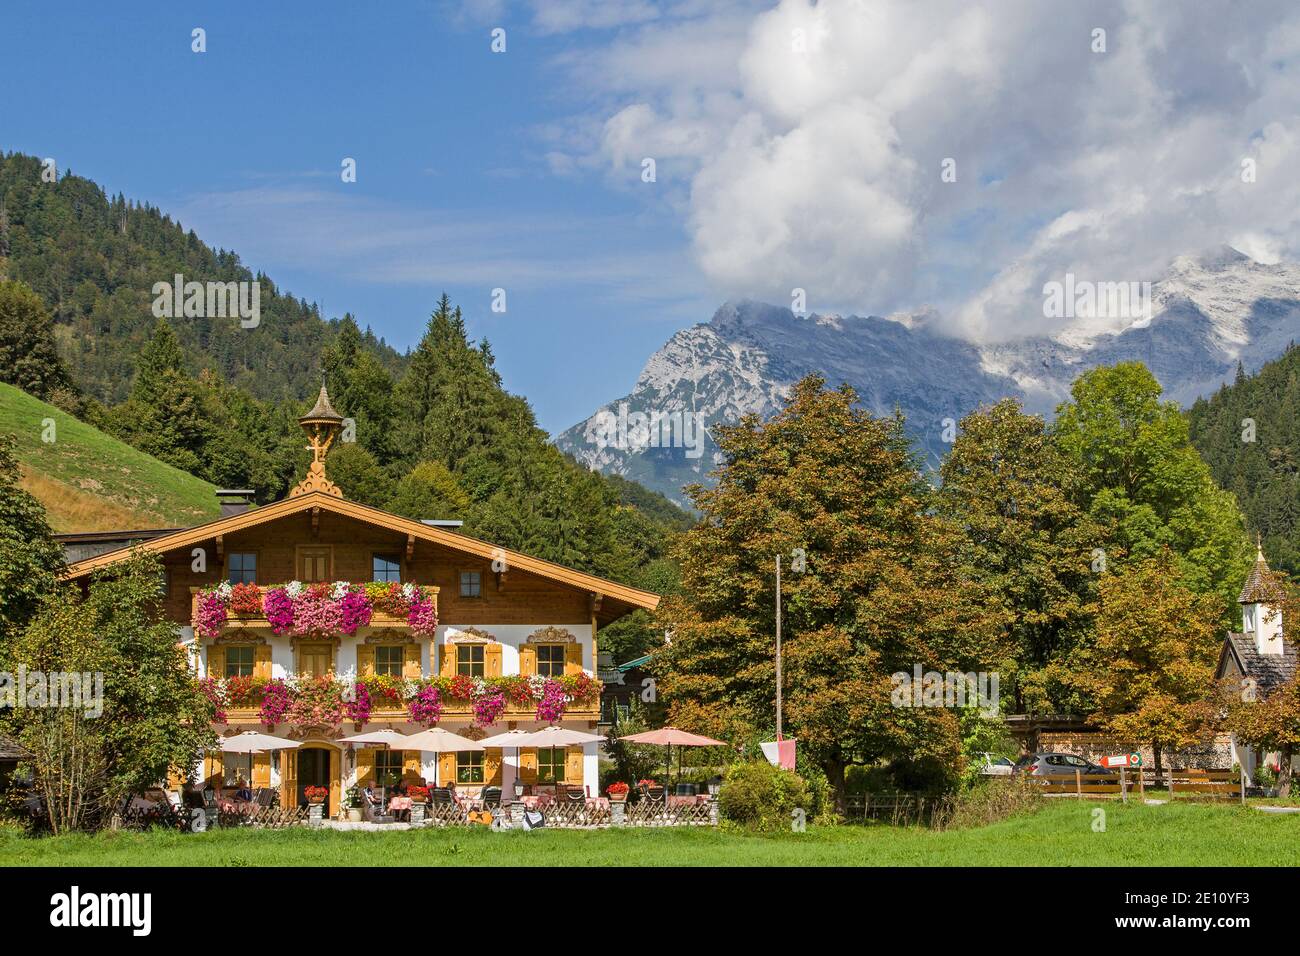 At The End Of Hochfilzen You Will Find This Typical Tyrolean Inn With Traditional Painting Stock Photo